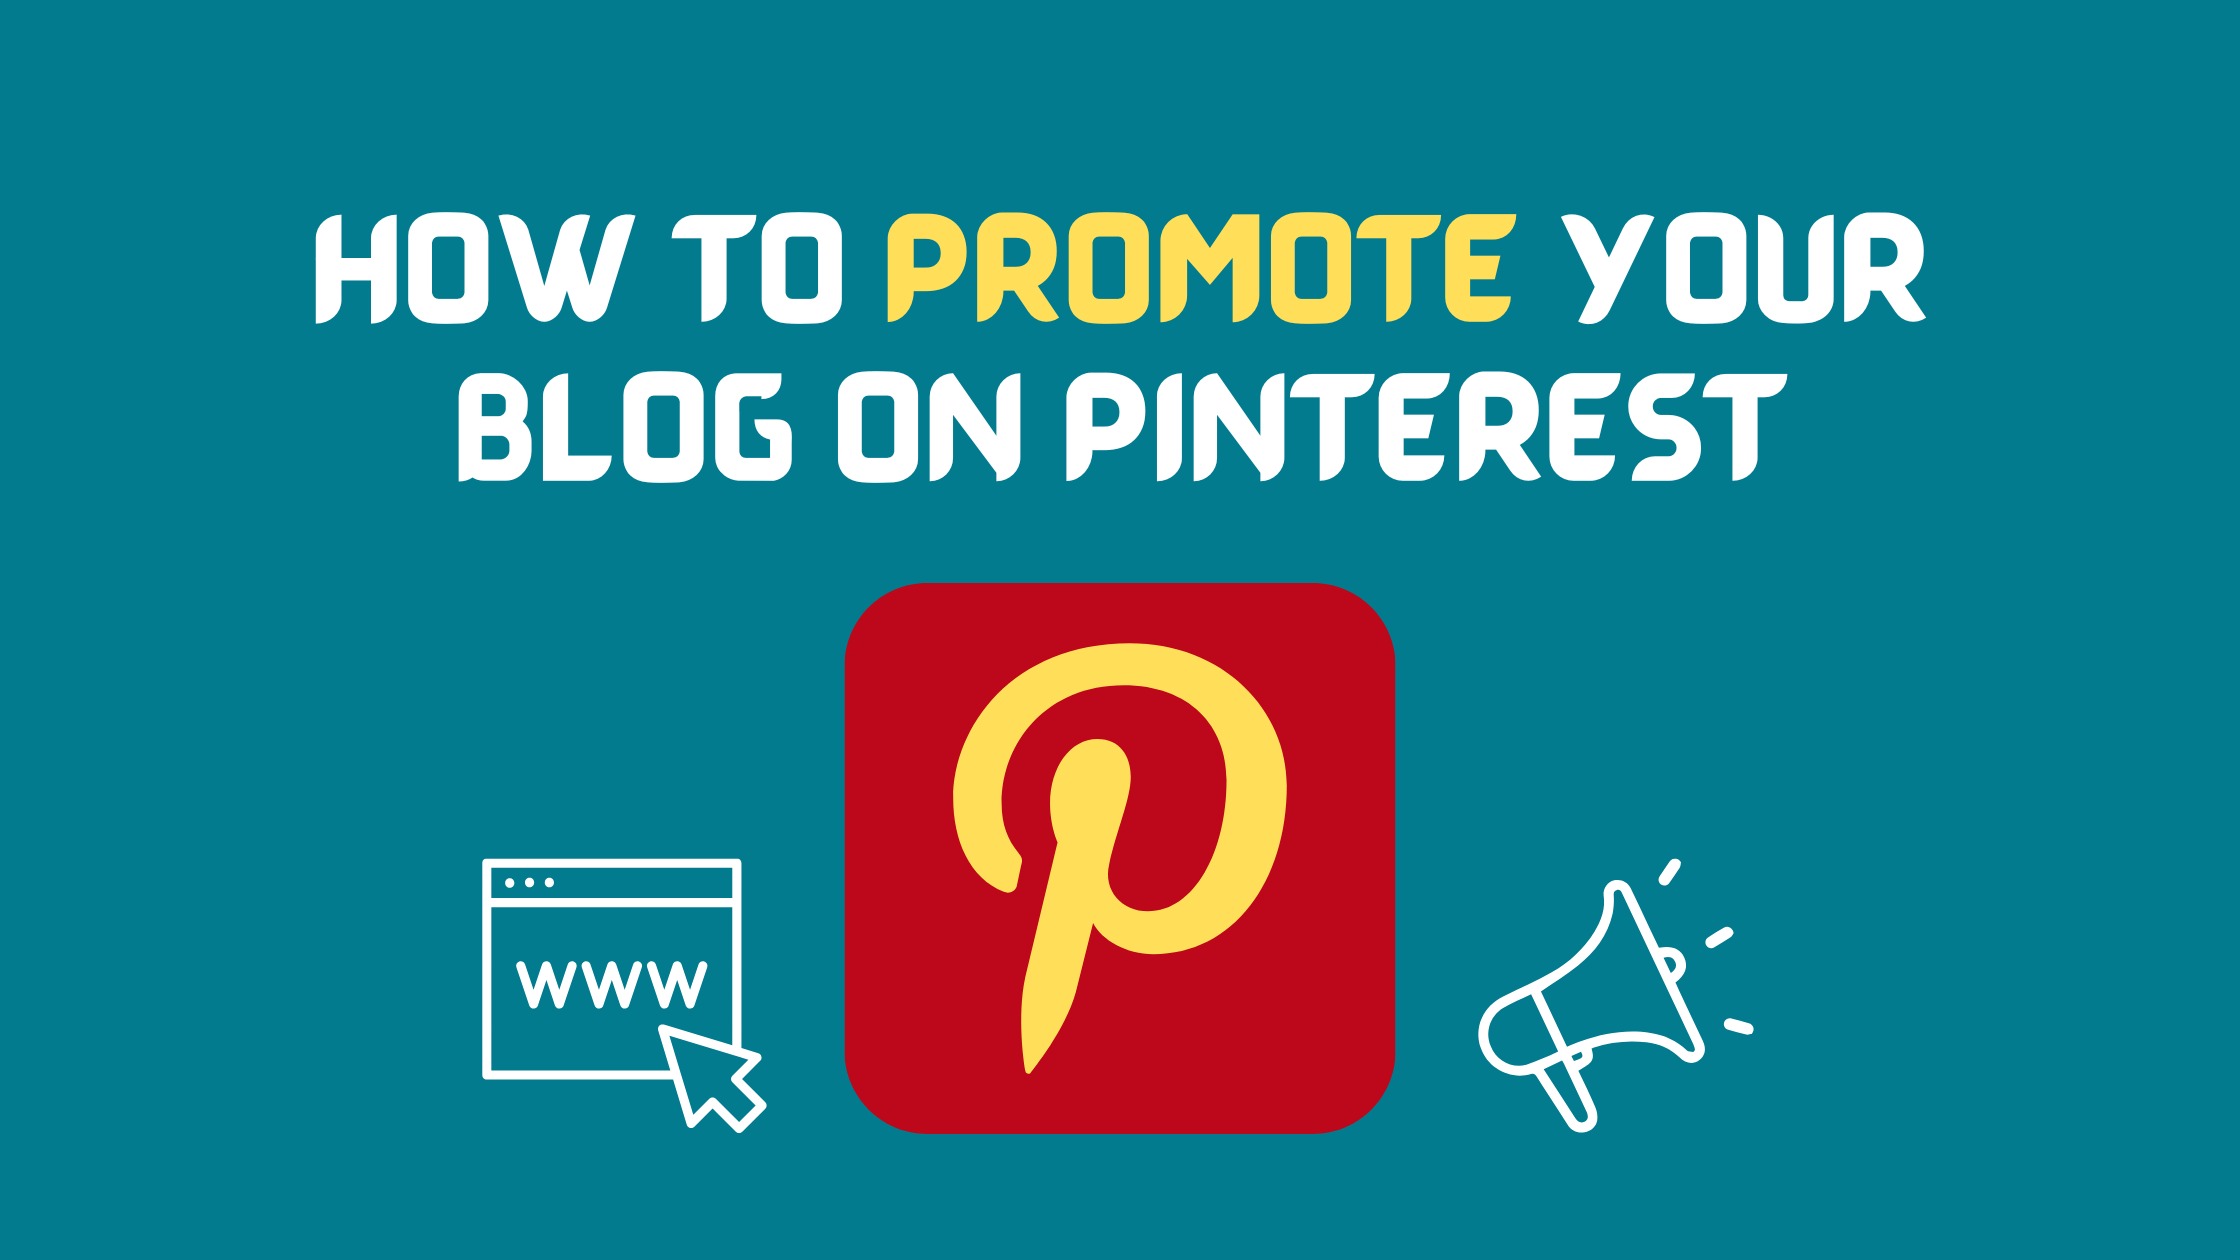 Promote Your Blog on Pinterest